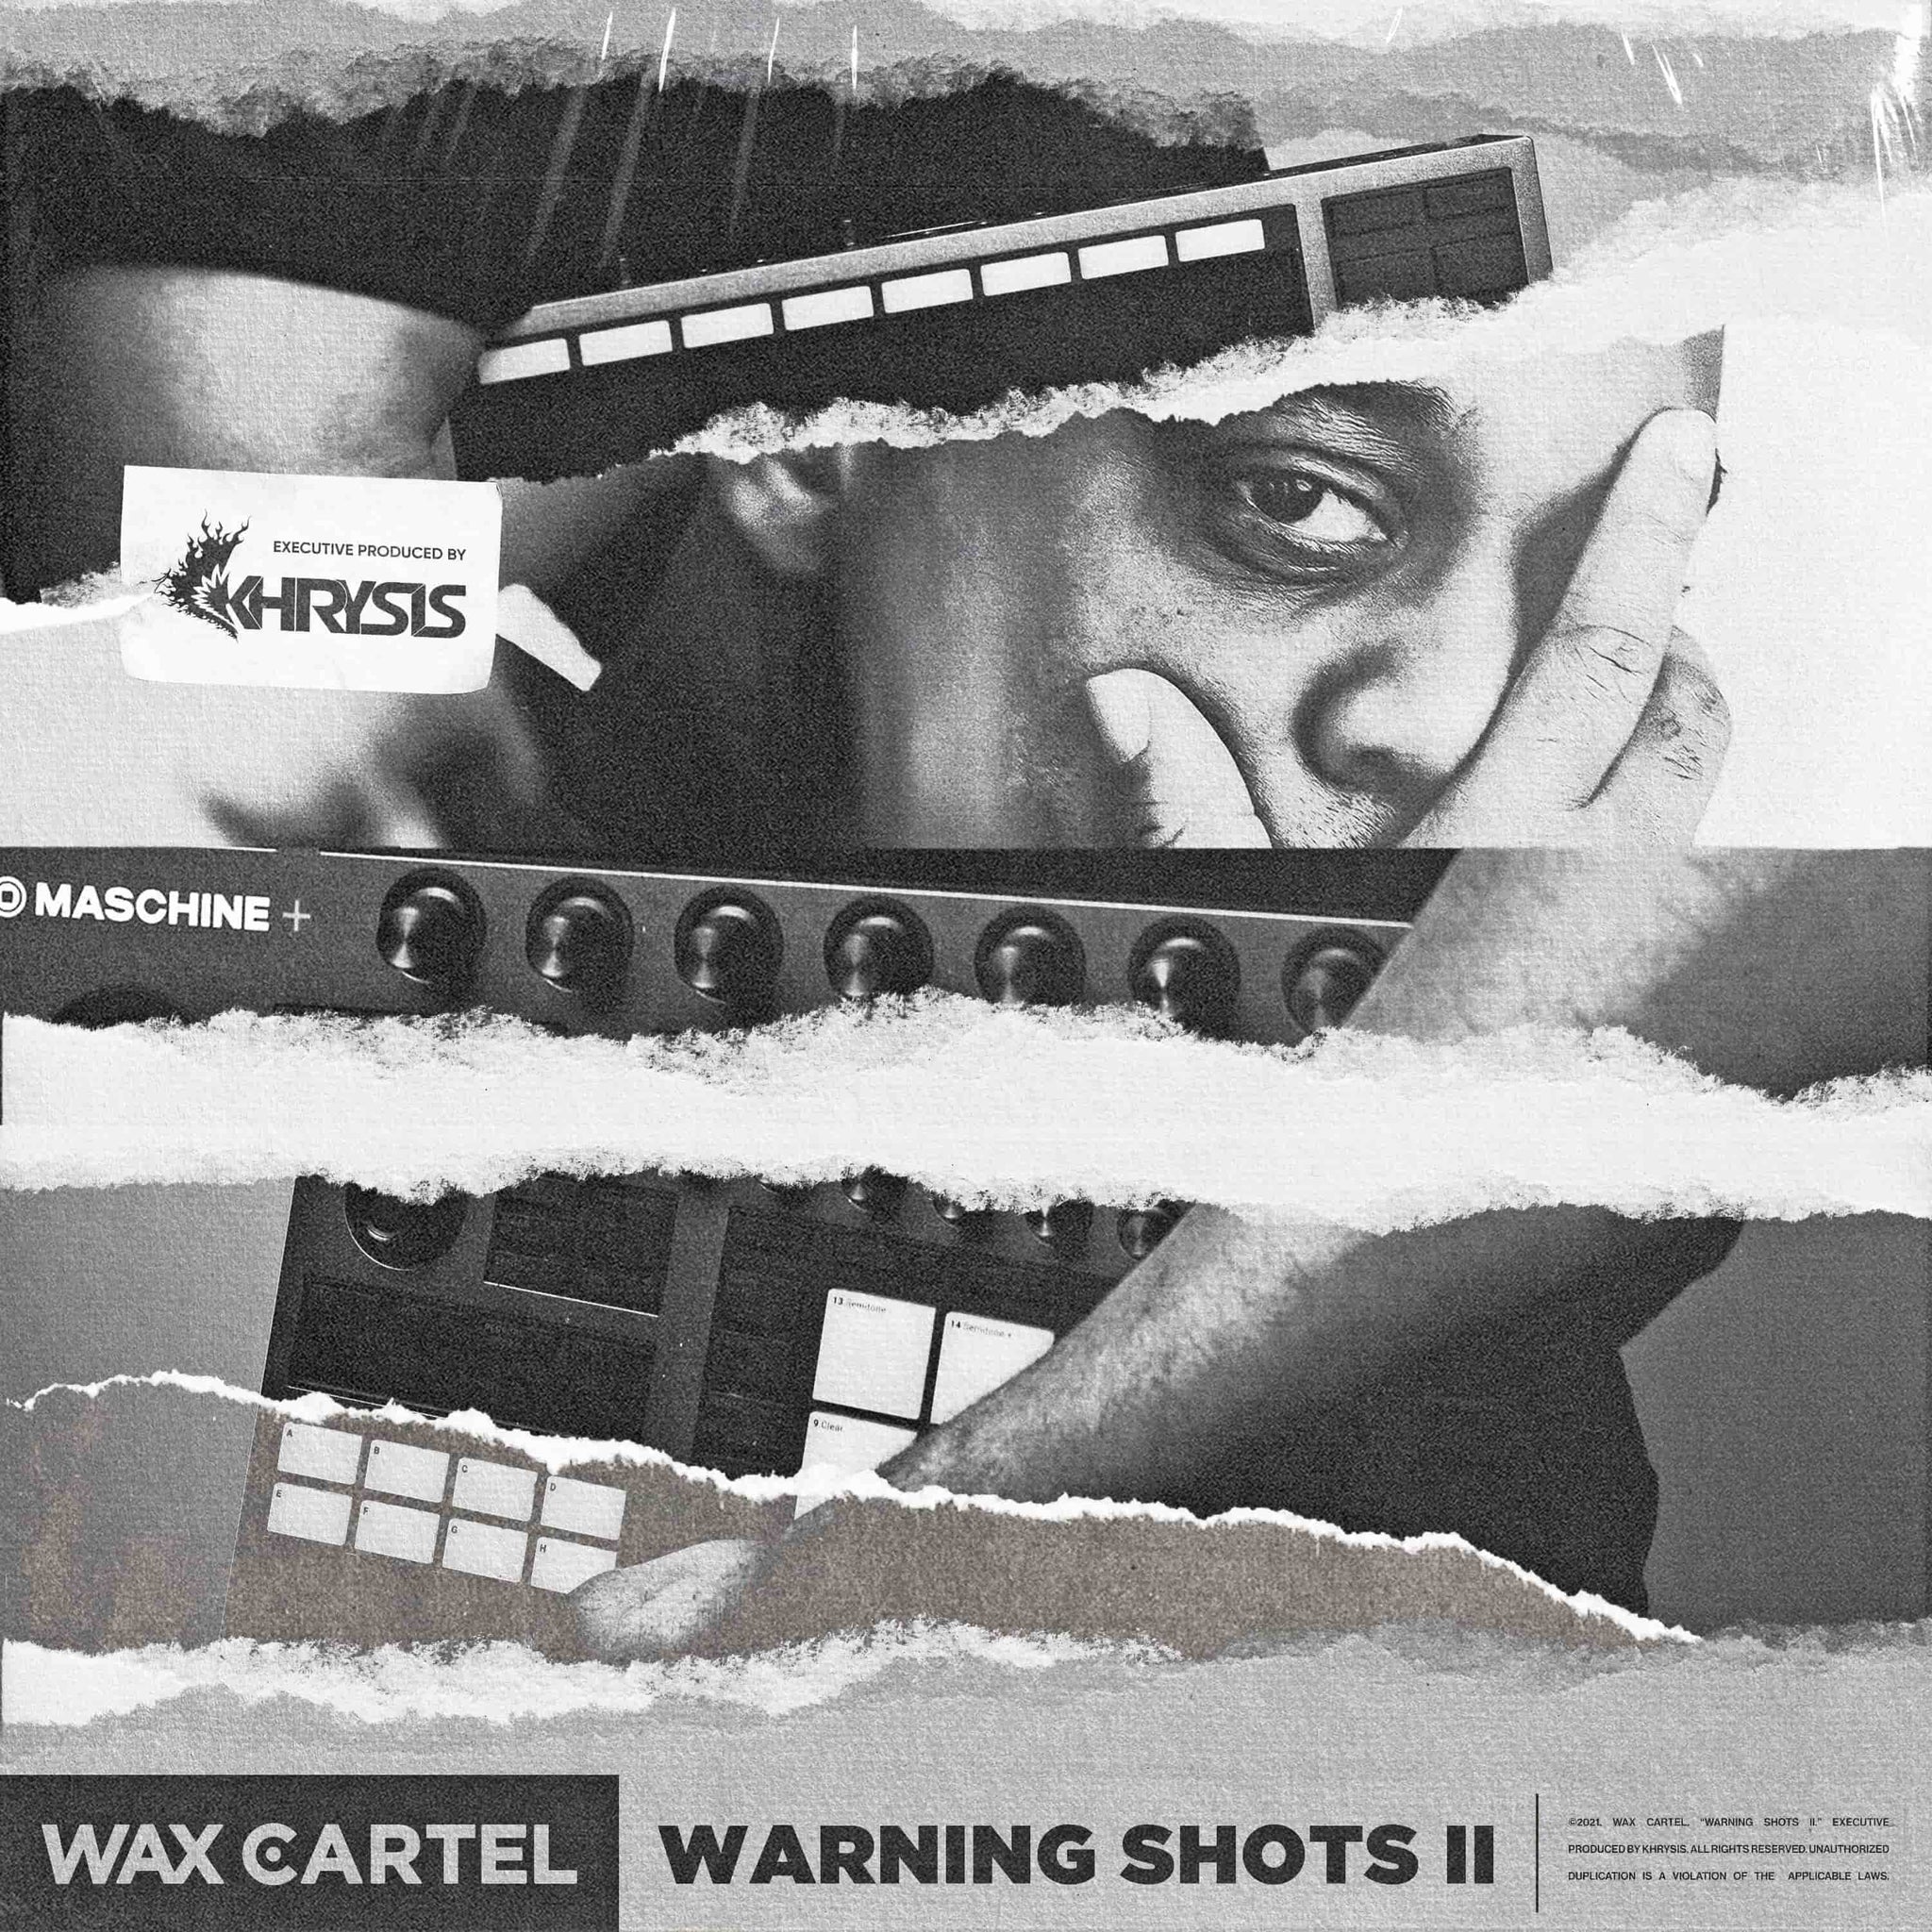 Black and white cover for drumbreak sample pack titled "Warning Shots 2" featuring Khrysis, producer for Jamla Records and member of 9th Wonder's Soul Council. 